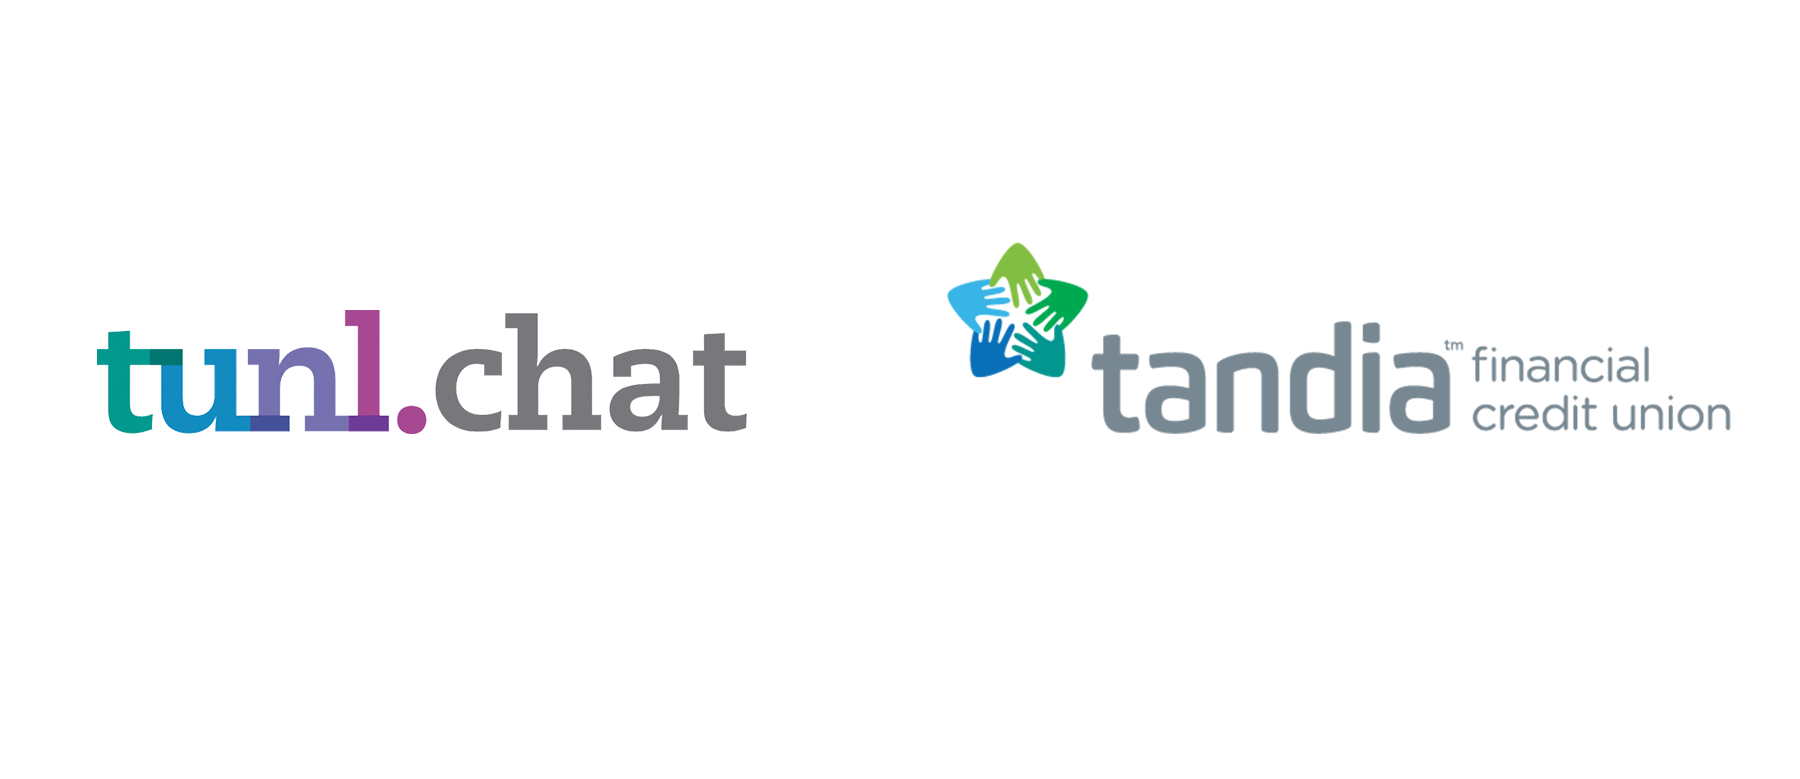 Tandia Financial Credit Union Slated to Implement FICANEX AI-Powered Chatbot